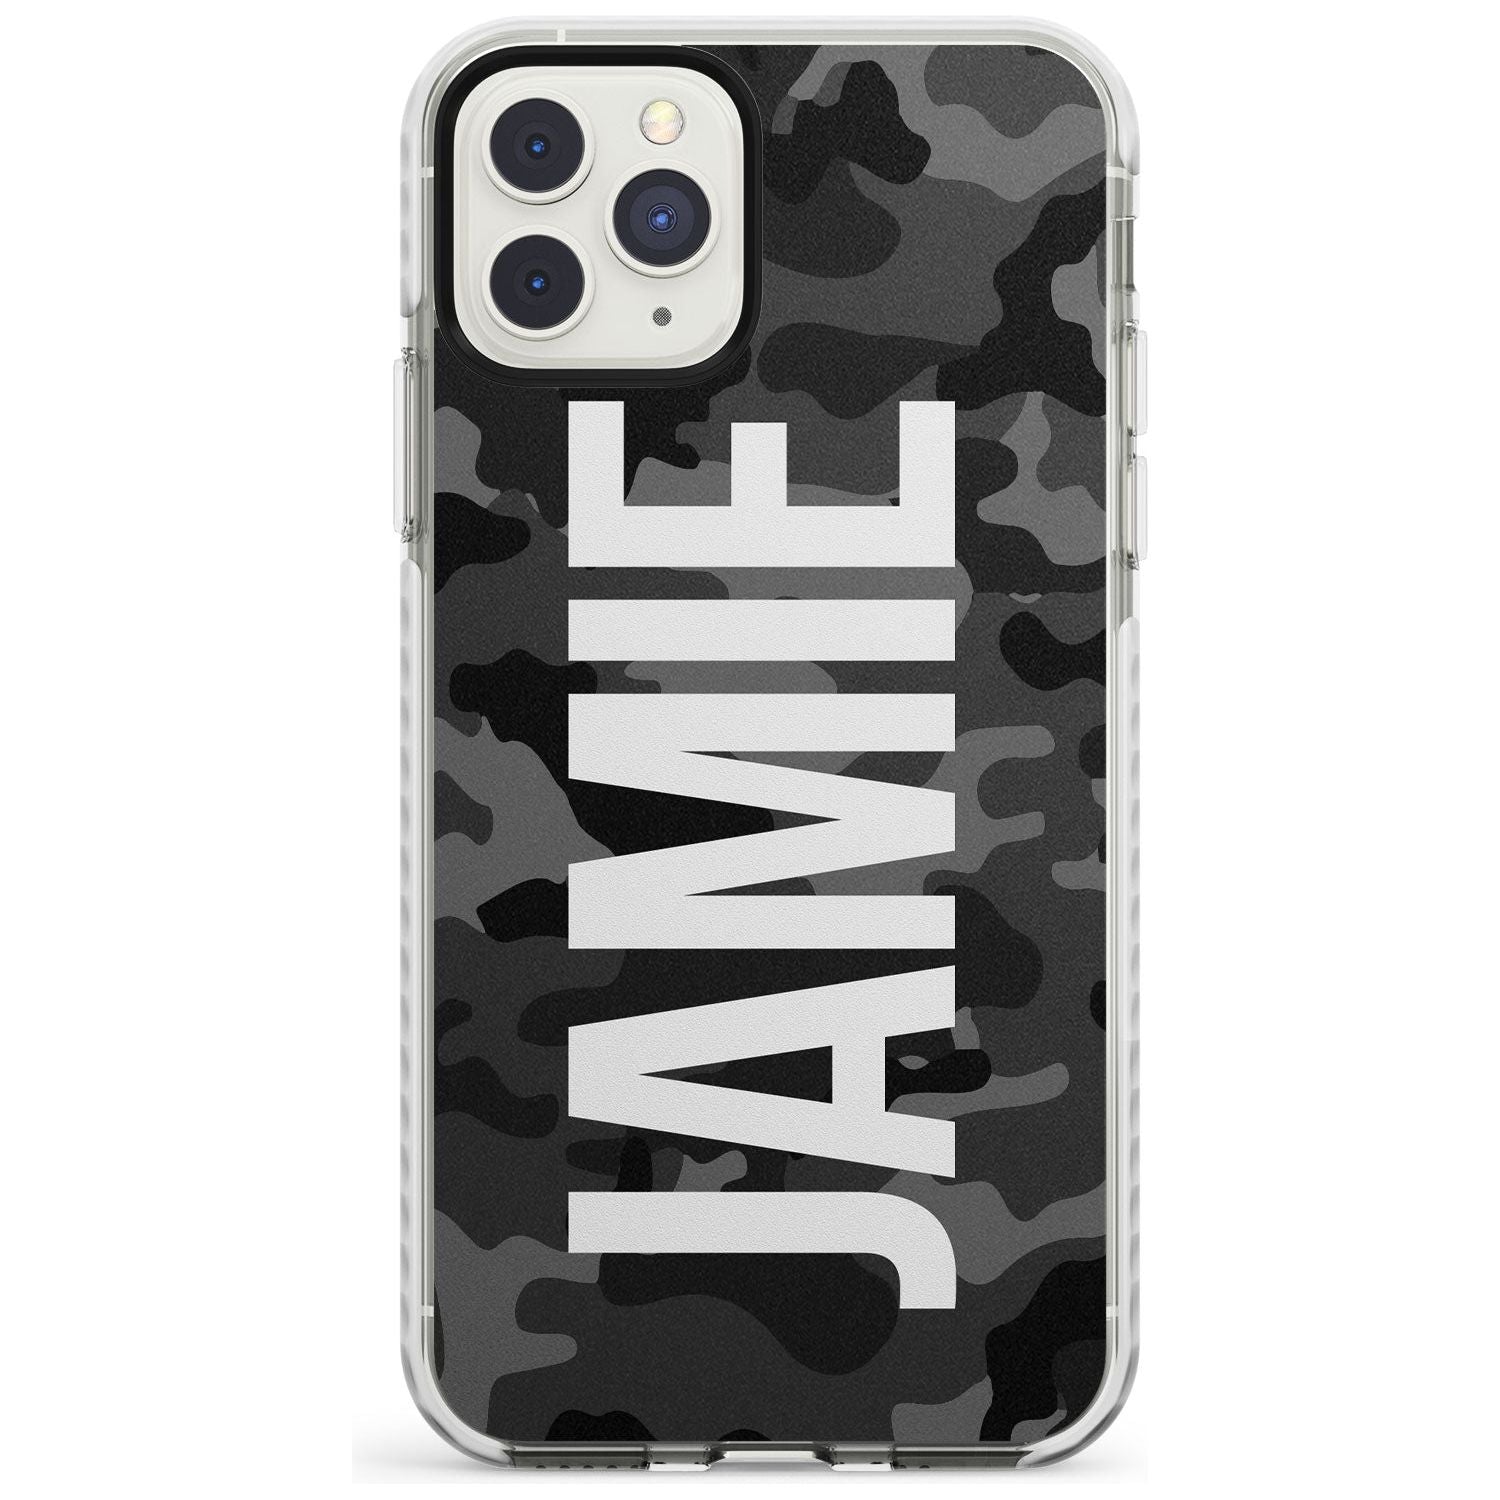 Vertical Name Personalised Black Camouflage Impact Phone Case for iPhone 11 Pro Max